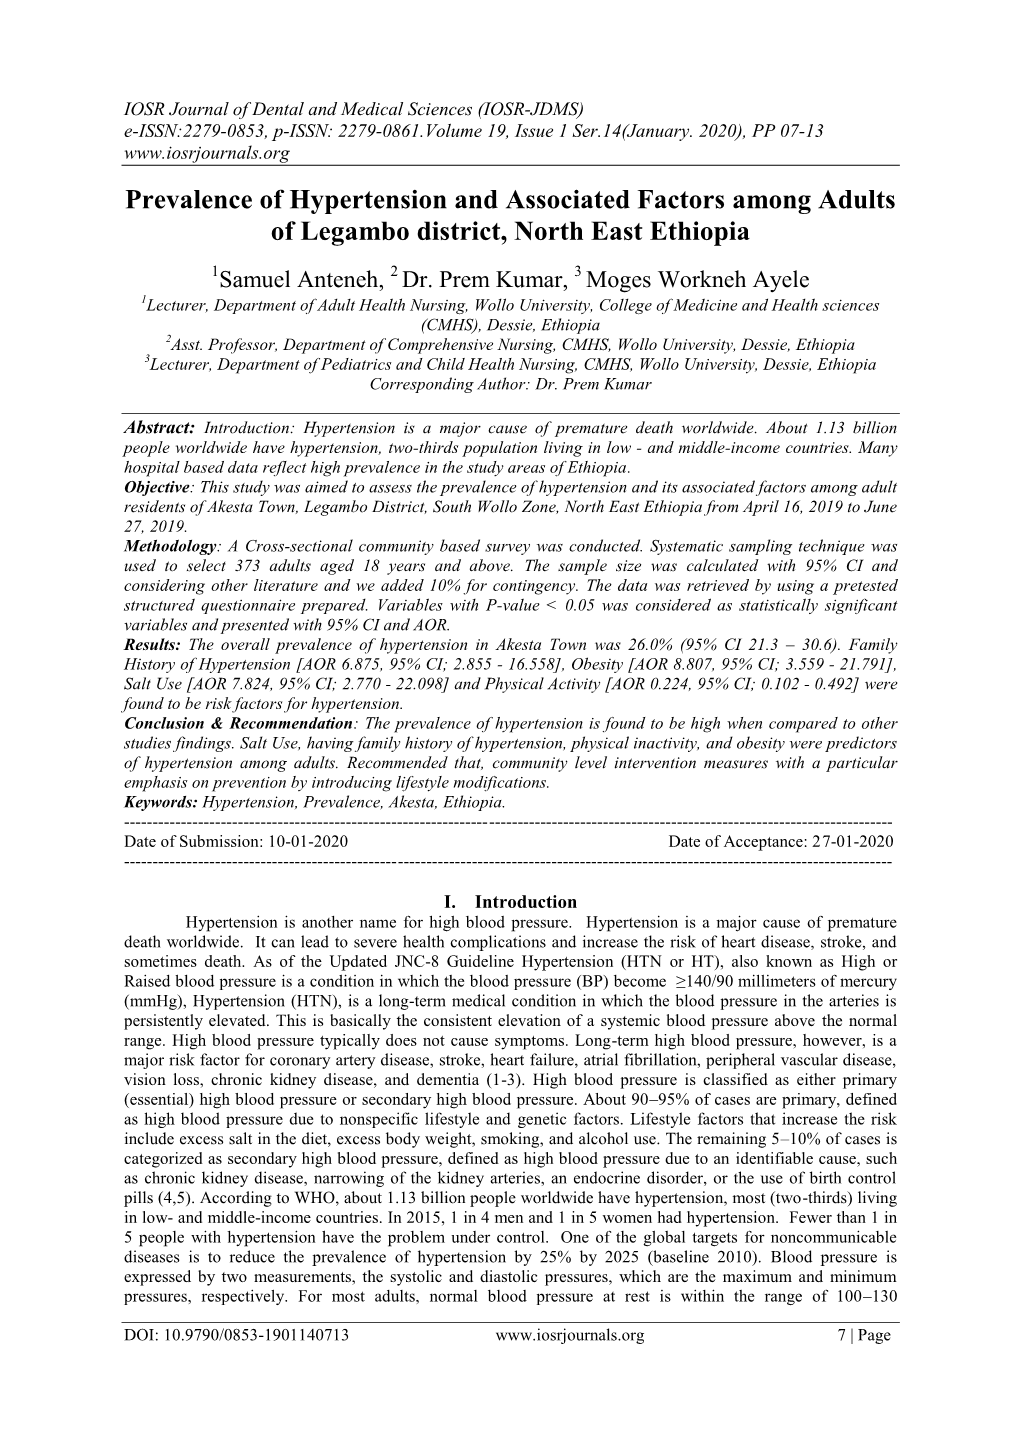 Prevalence of Hypertension and Associated Factors Among Adults of Legambo District, North East Ethiopia